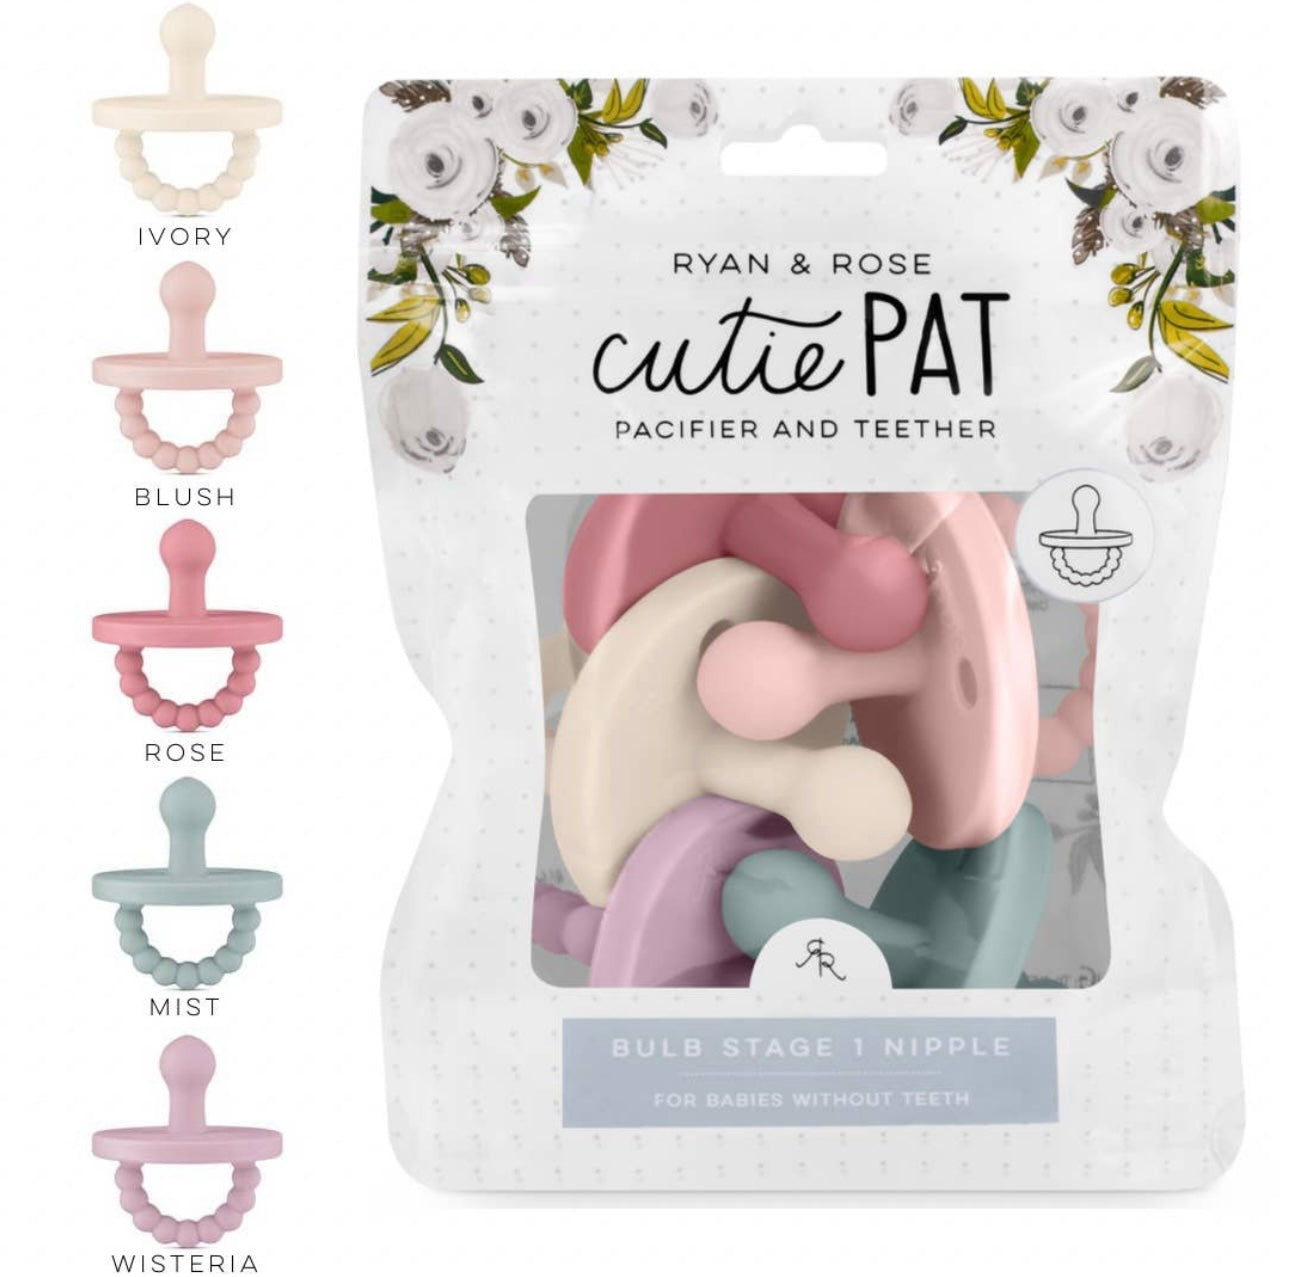 Ryan and Rose Cutie Pat Pacifier and Teether Sets